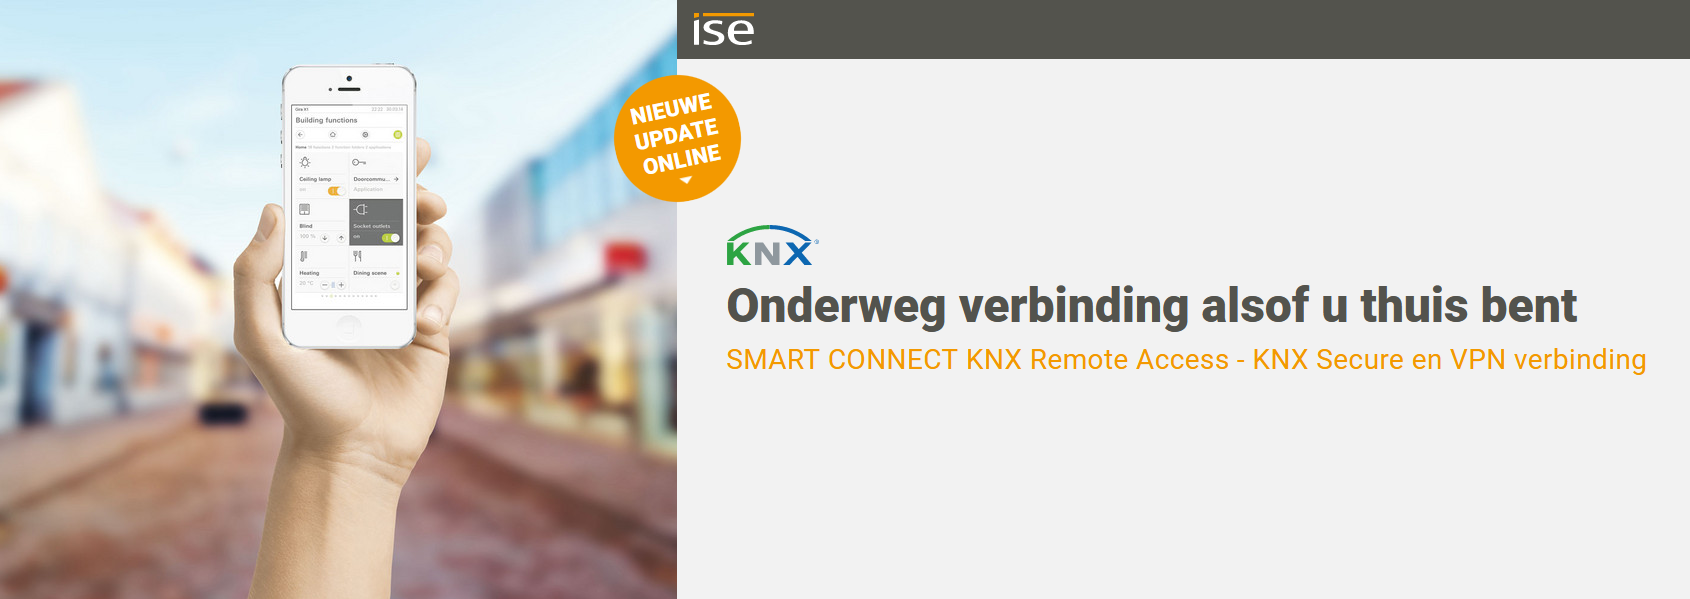 ISE Smart Connect